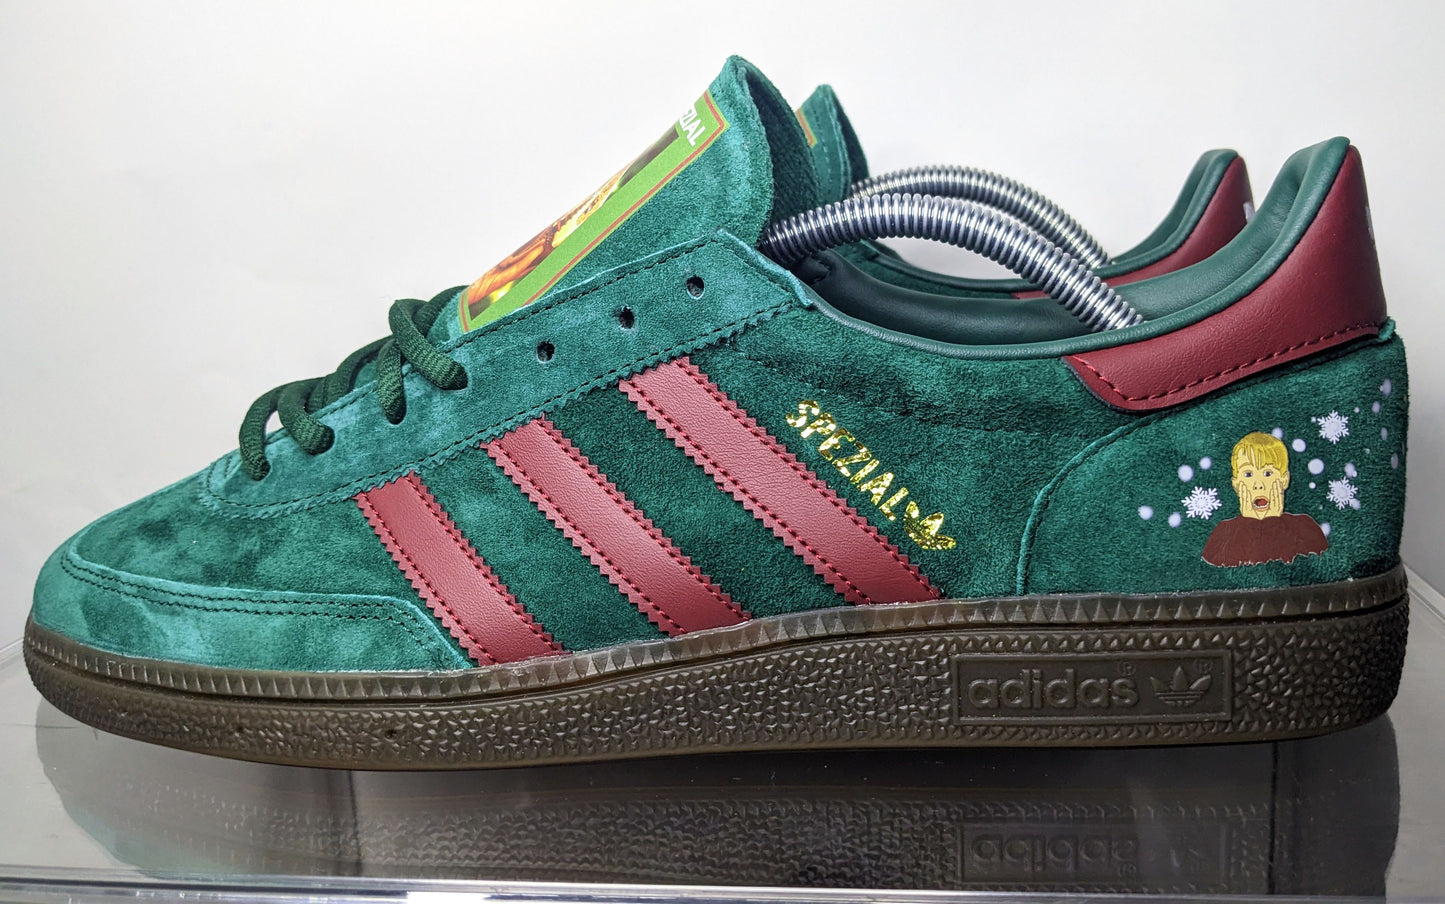 Limited edition Home Alone Christmas movie green / red Adidas Handball Spezial trainers / sneakers